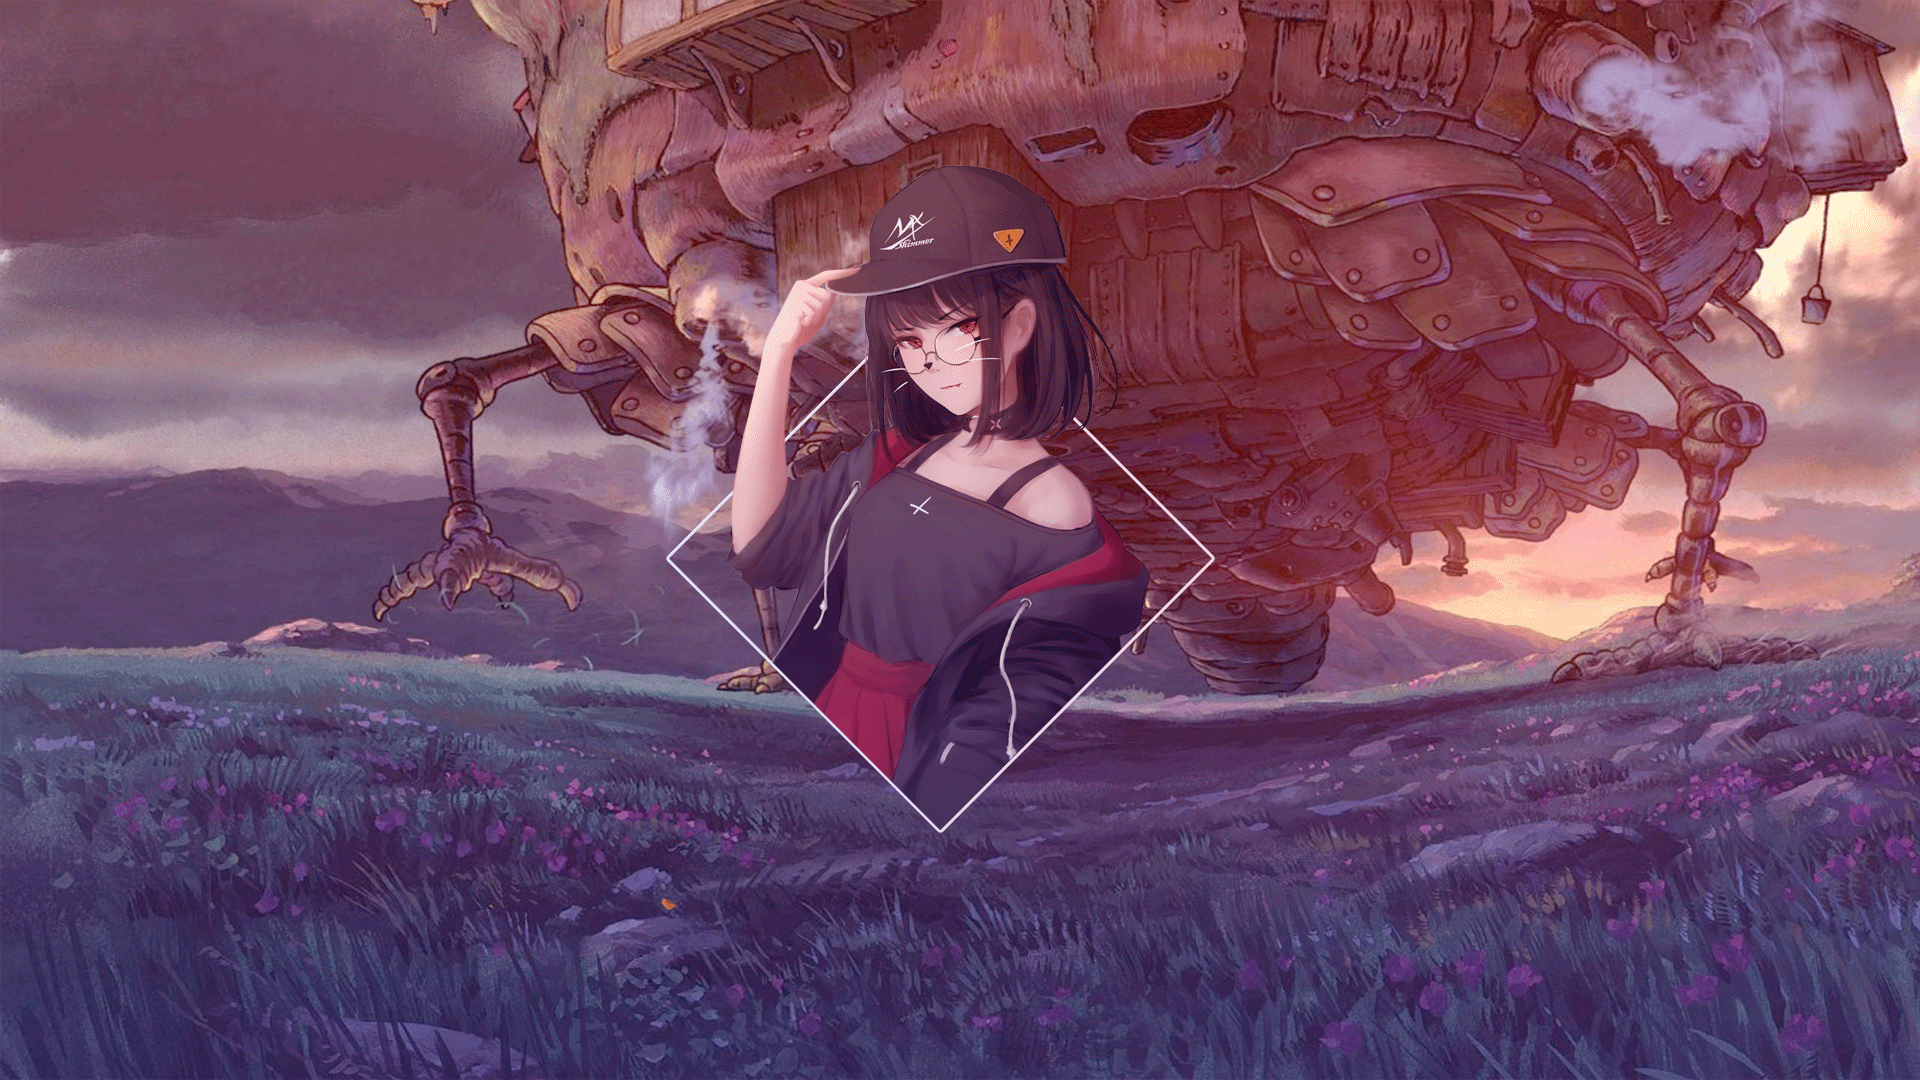 Anime Anime Girls Background Art Anime Wallpaper Digital Art Photoshop Picture In Picture Landscape 1920x1080